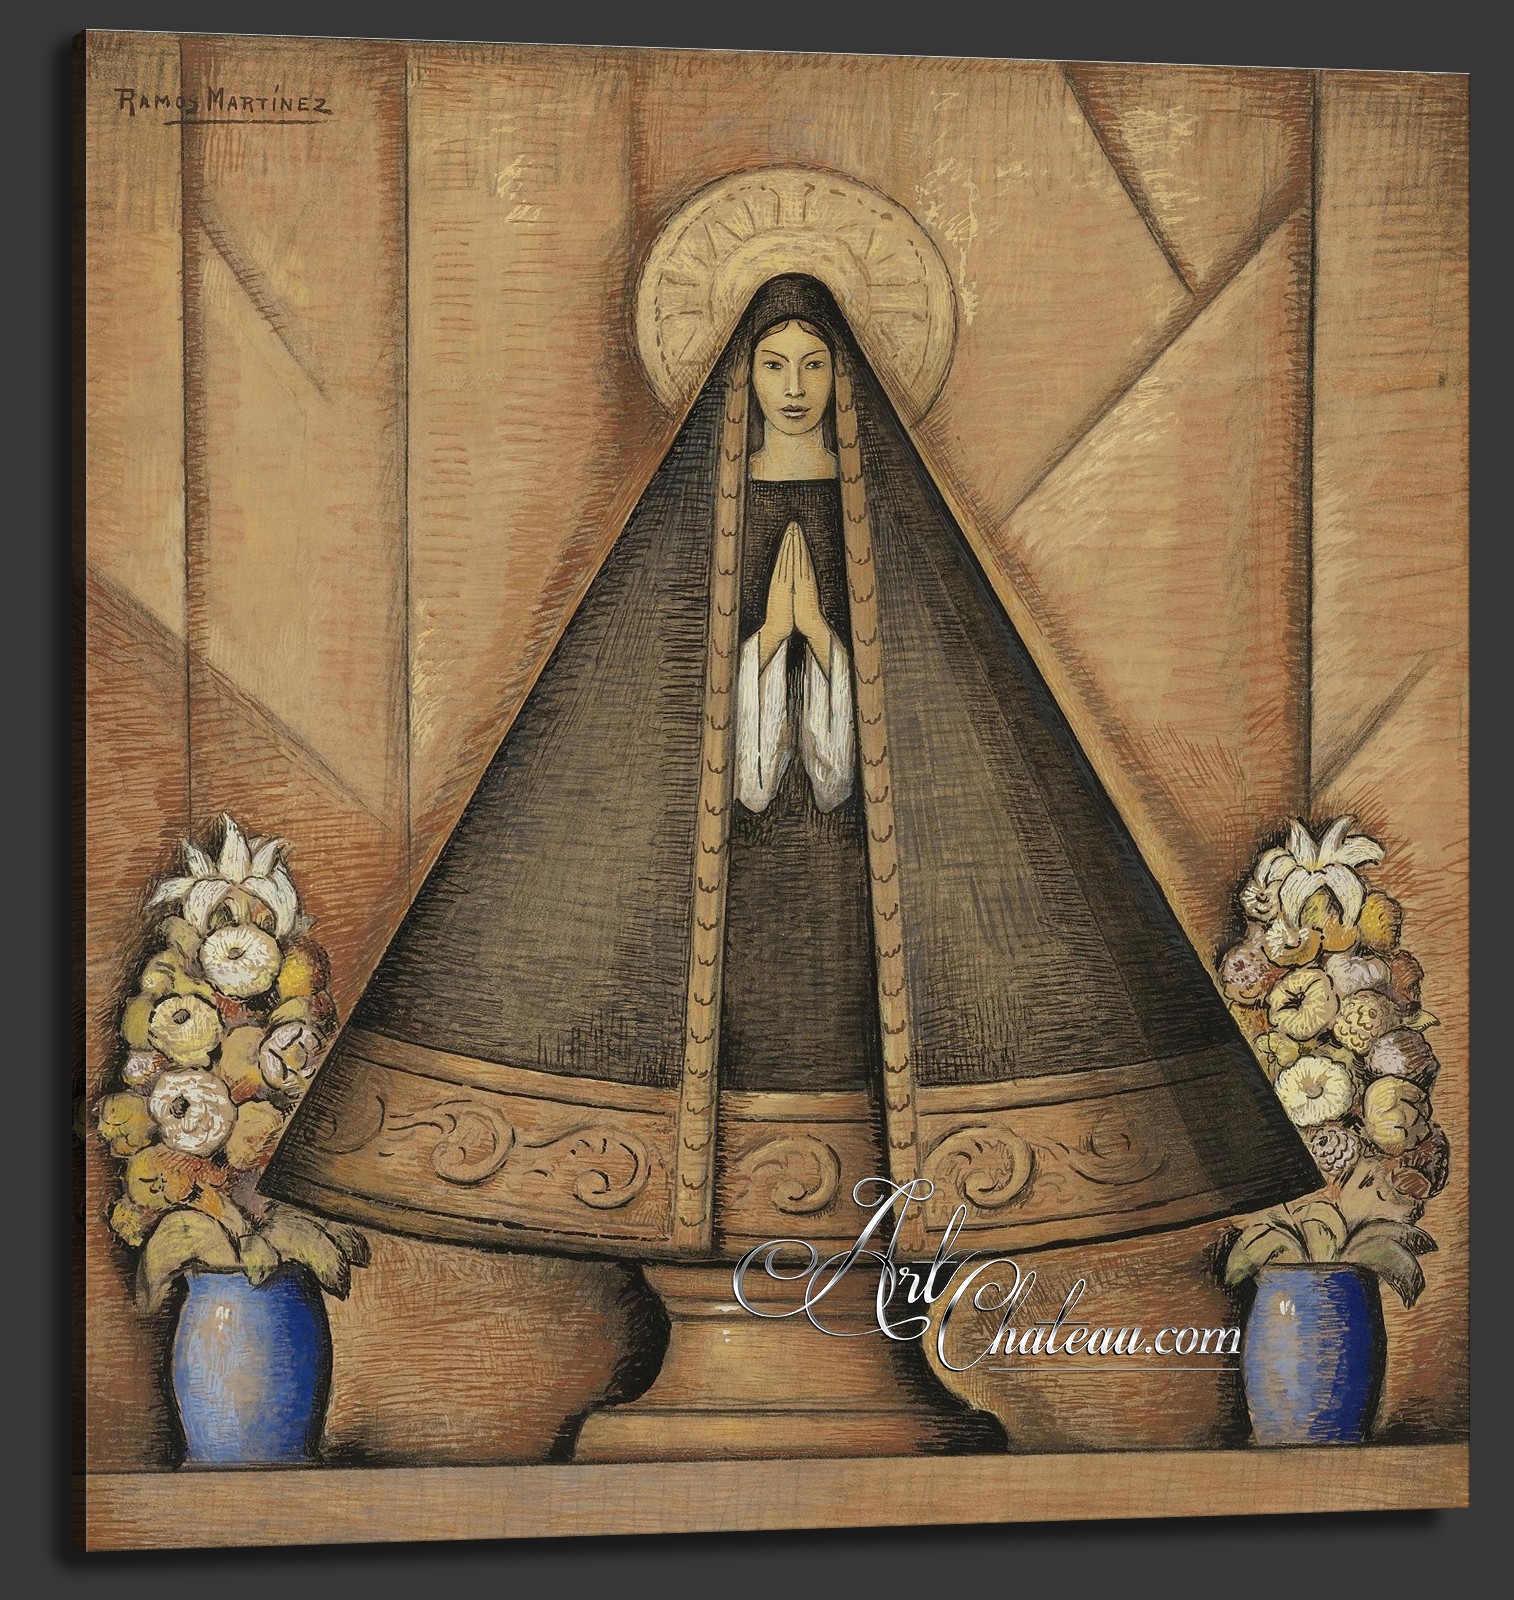 Our Lady of Solitude, after Alfredo Ramos Martínez